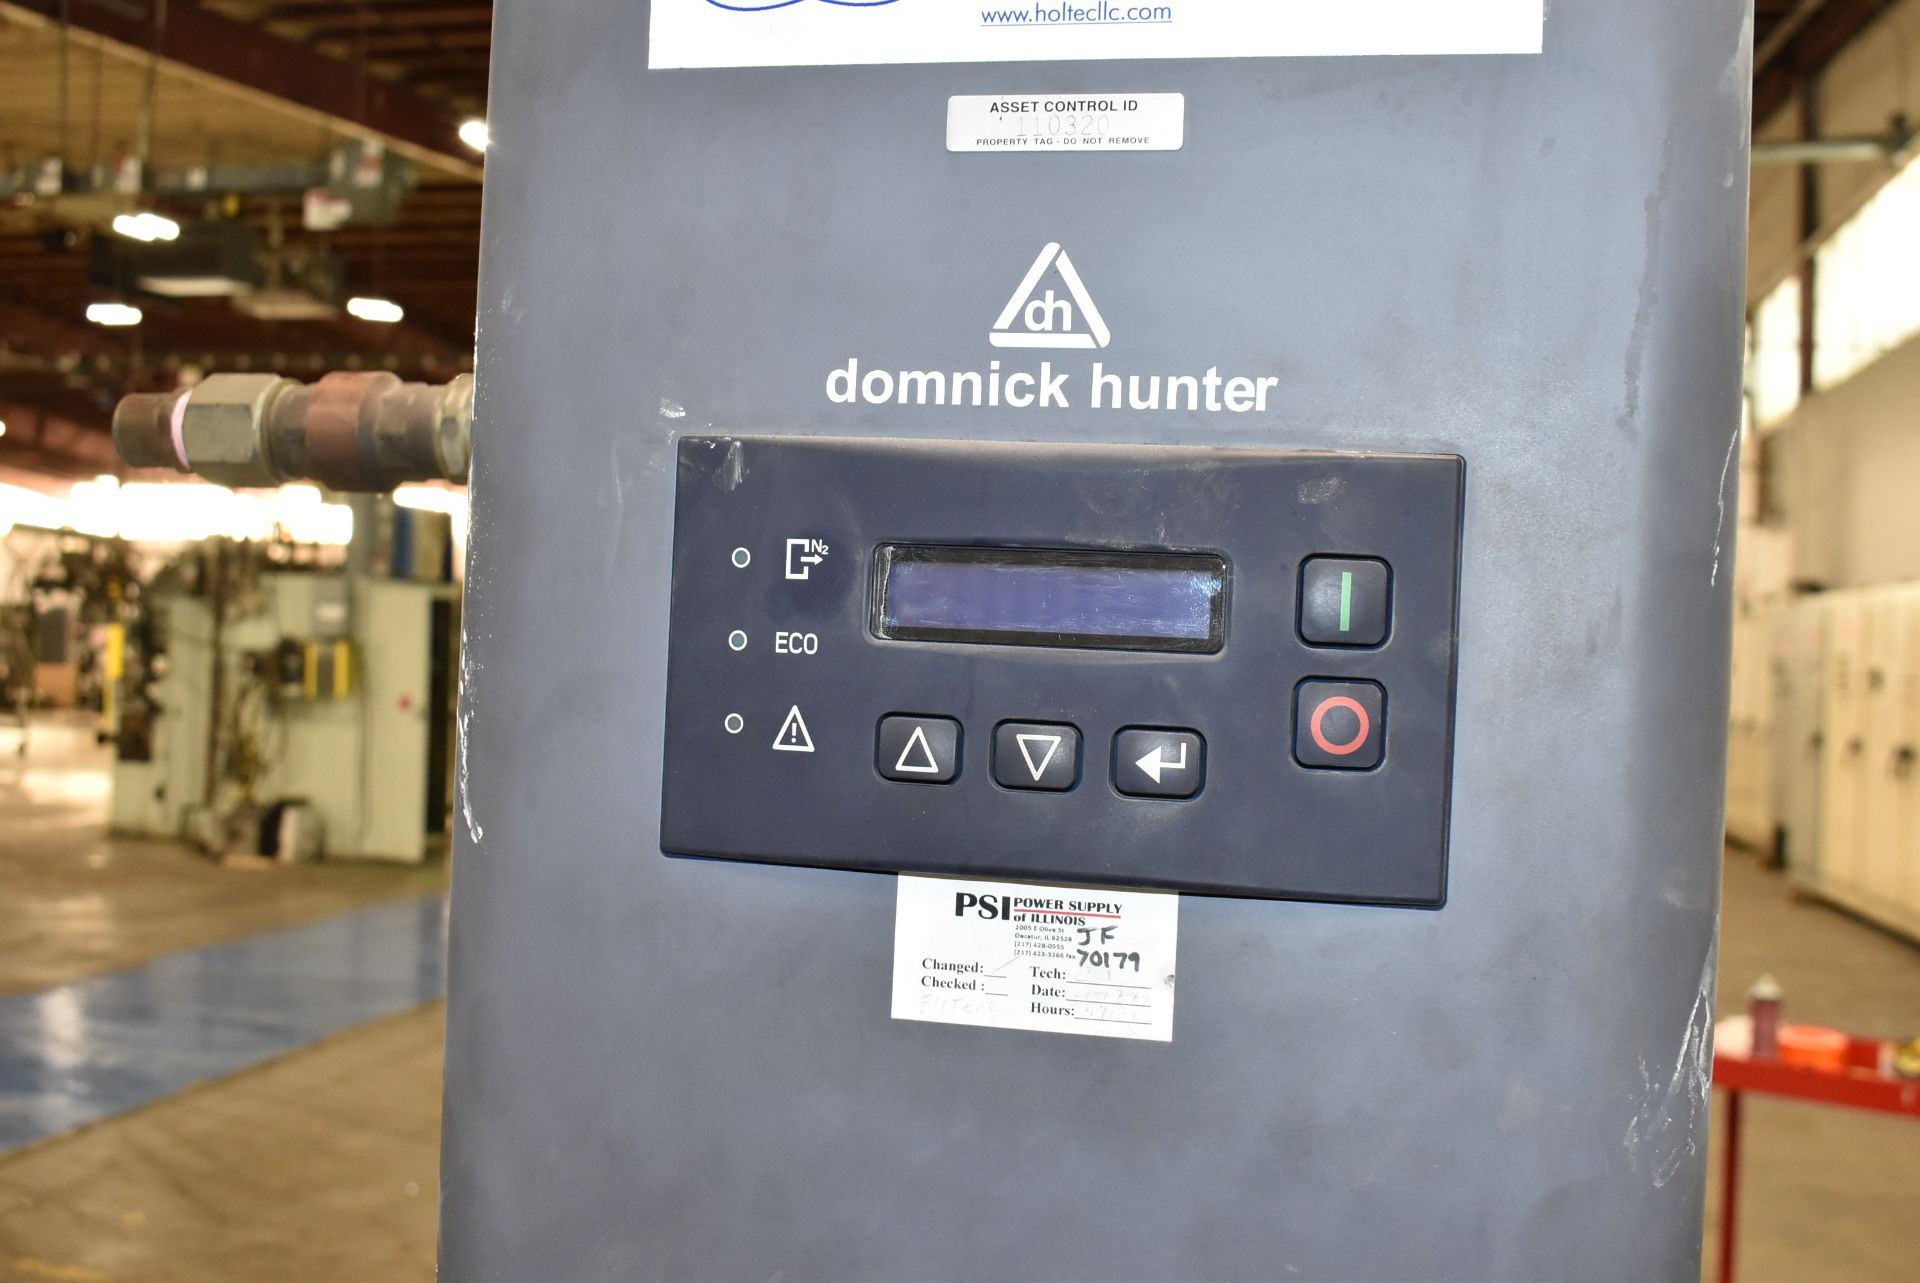 DOMNICK HUNTER MAXIGAS 108NCALL NITROGEN GENERATOR WITH 210 LITER MAX VOLUME, S/N 08MX0061 - Image 2 of 5